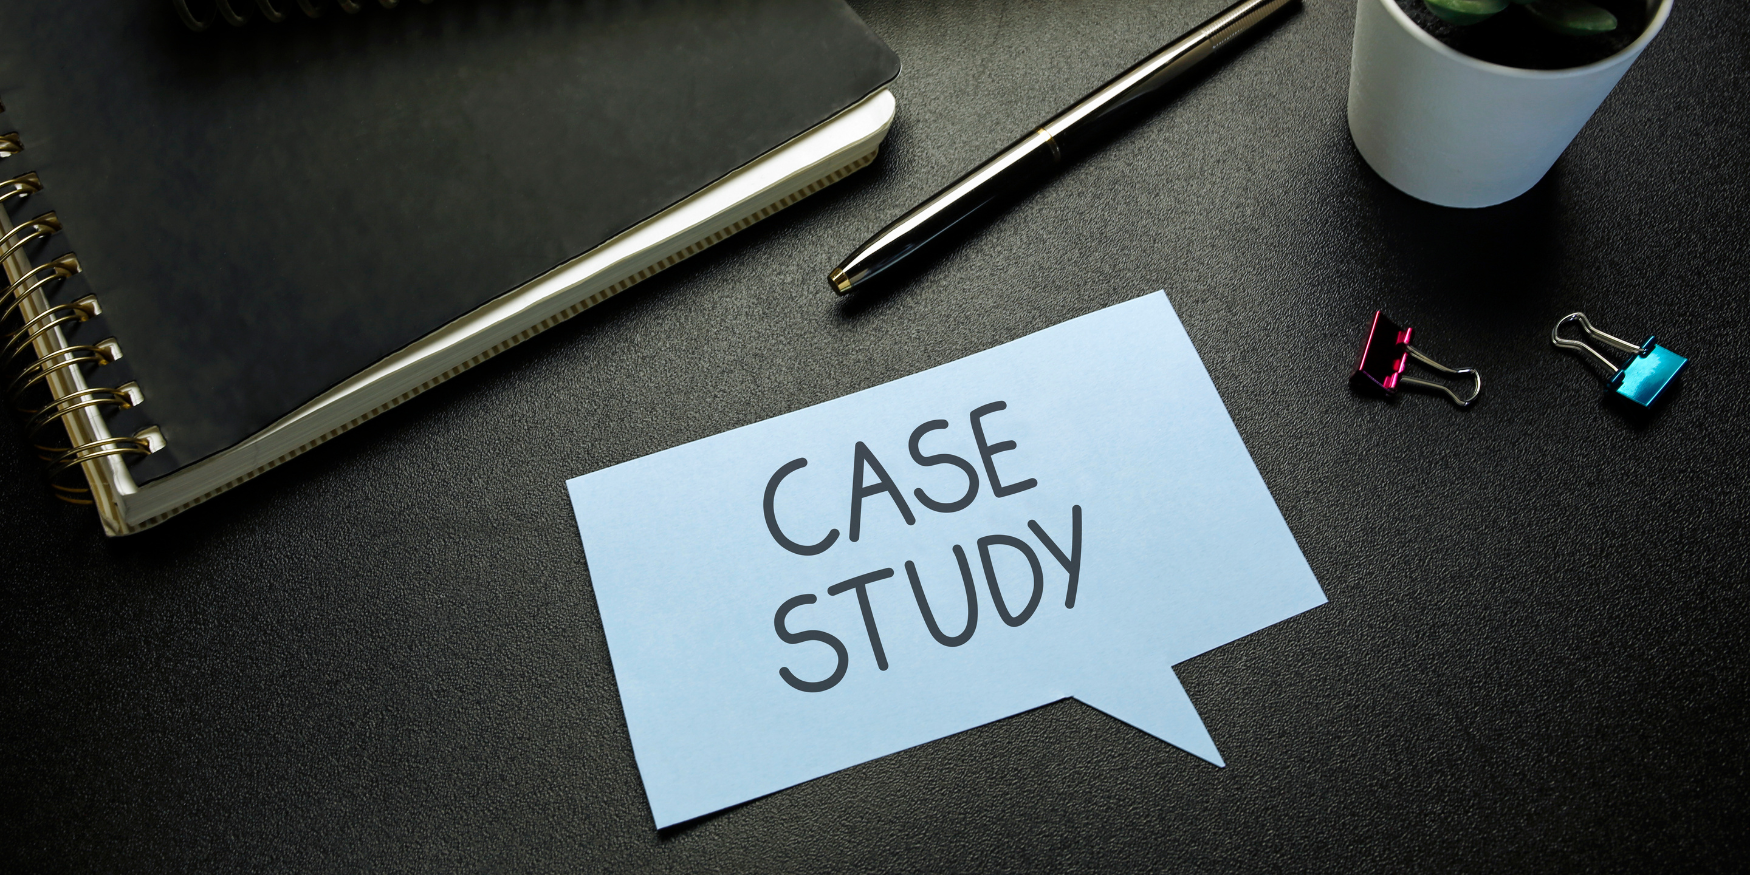 How to Write a Case Study to Earn Trust and Gain New Business